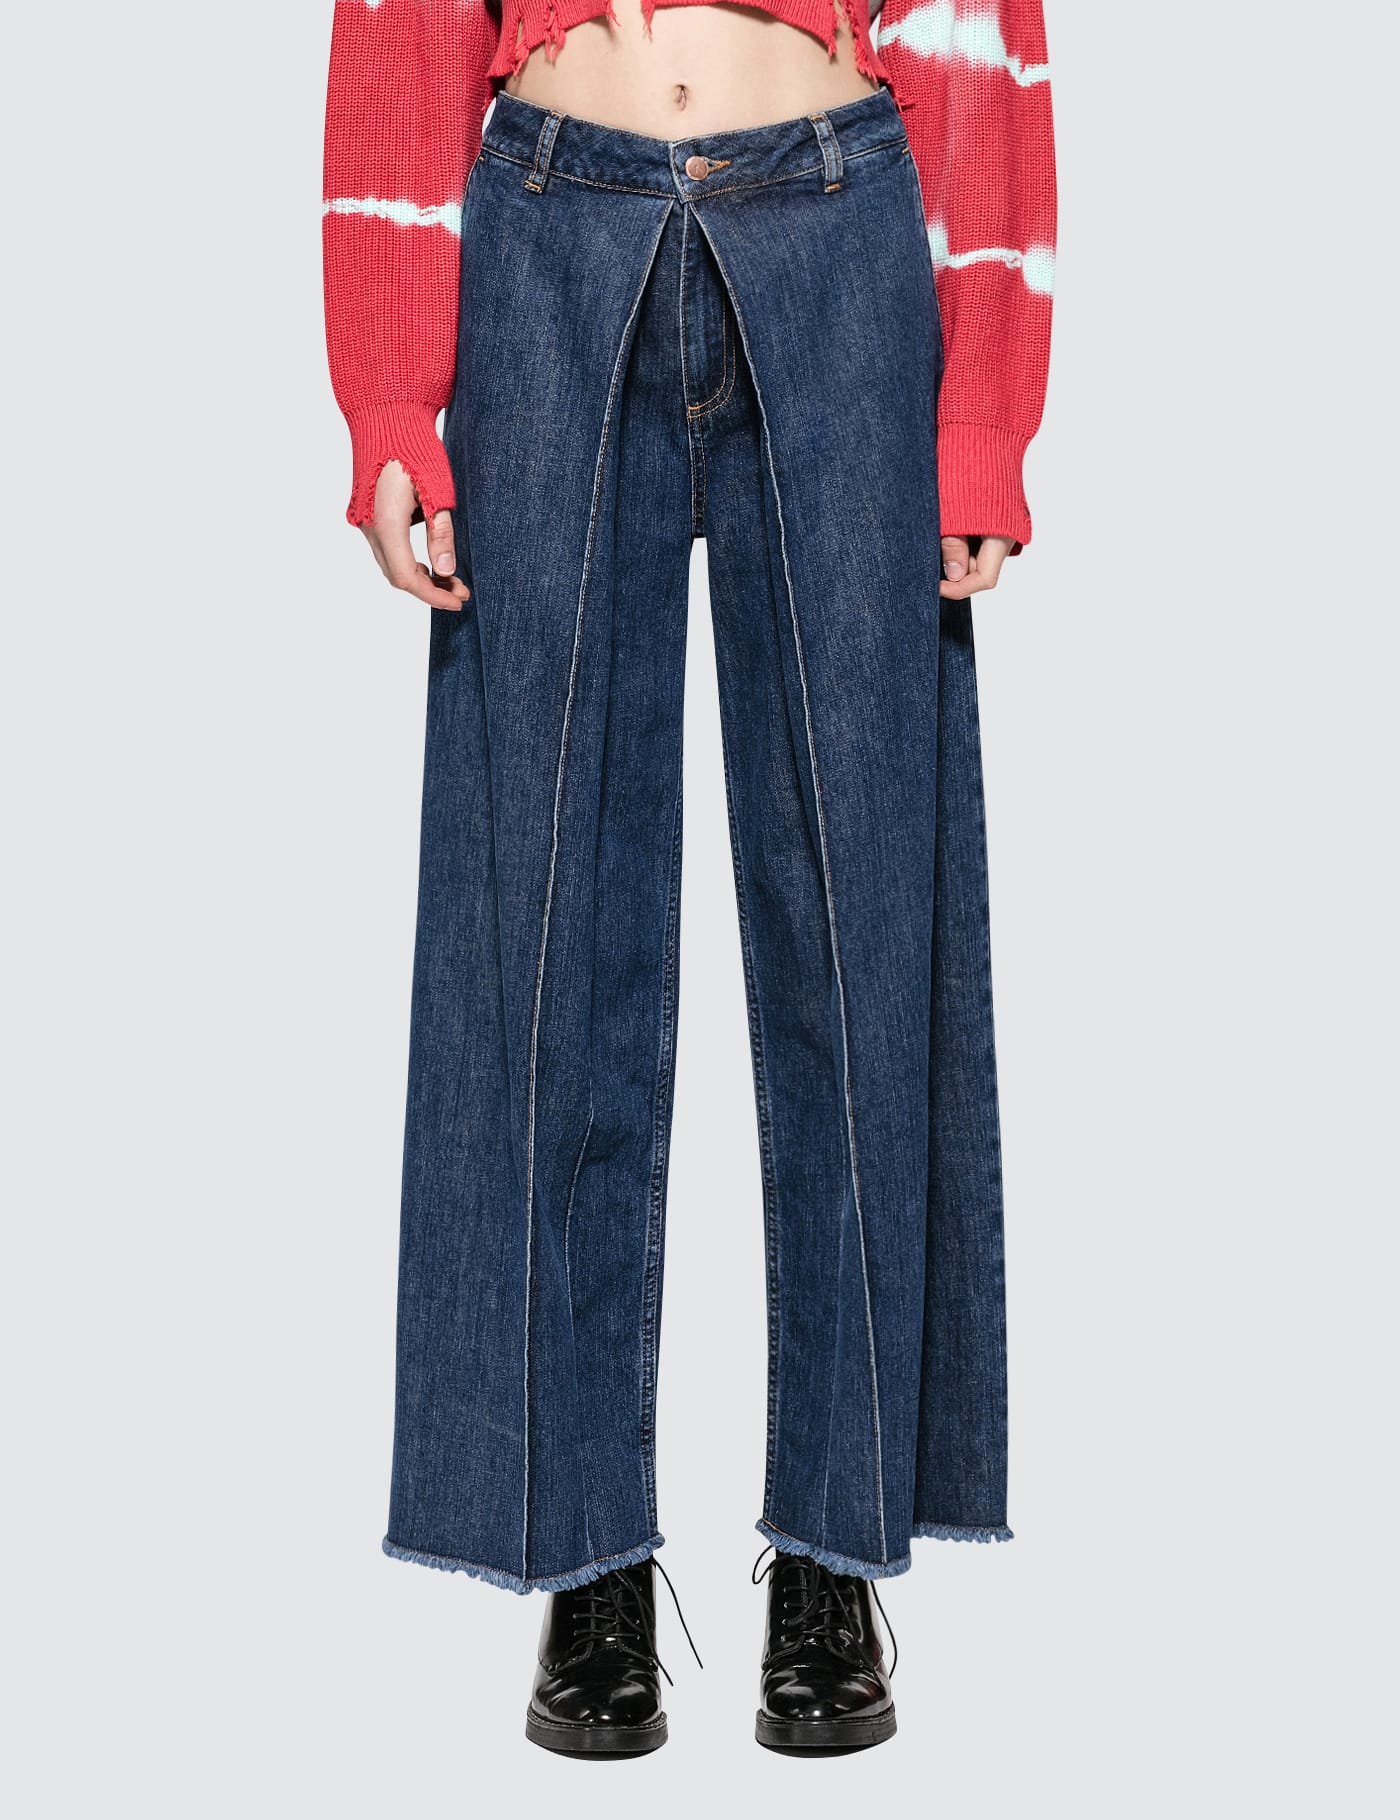 Aalto - Jeans With Pleats | HBX - Globally Curated Fashion and